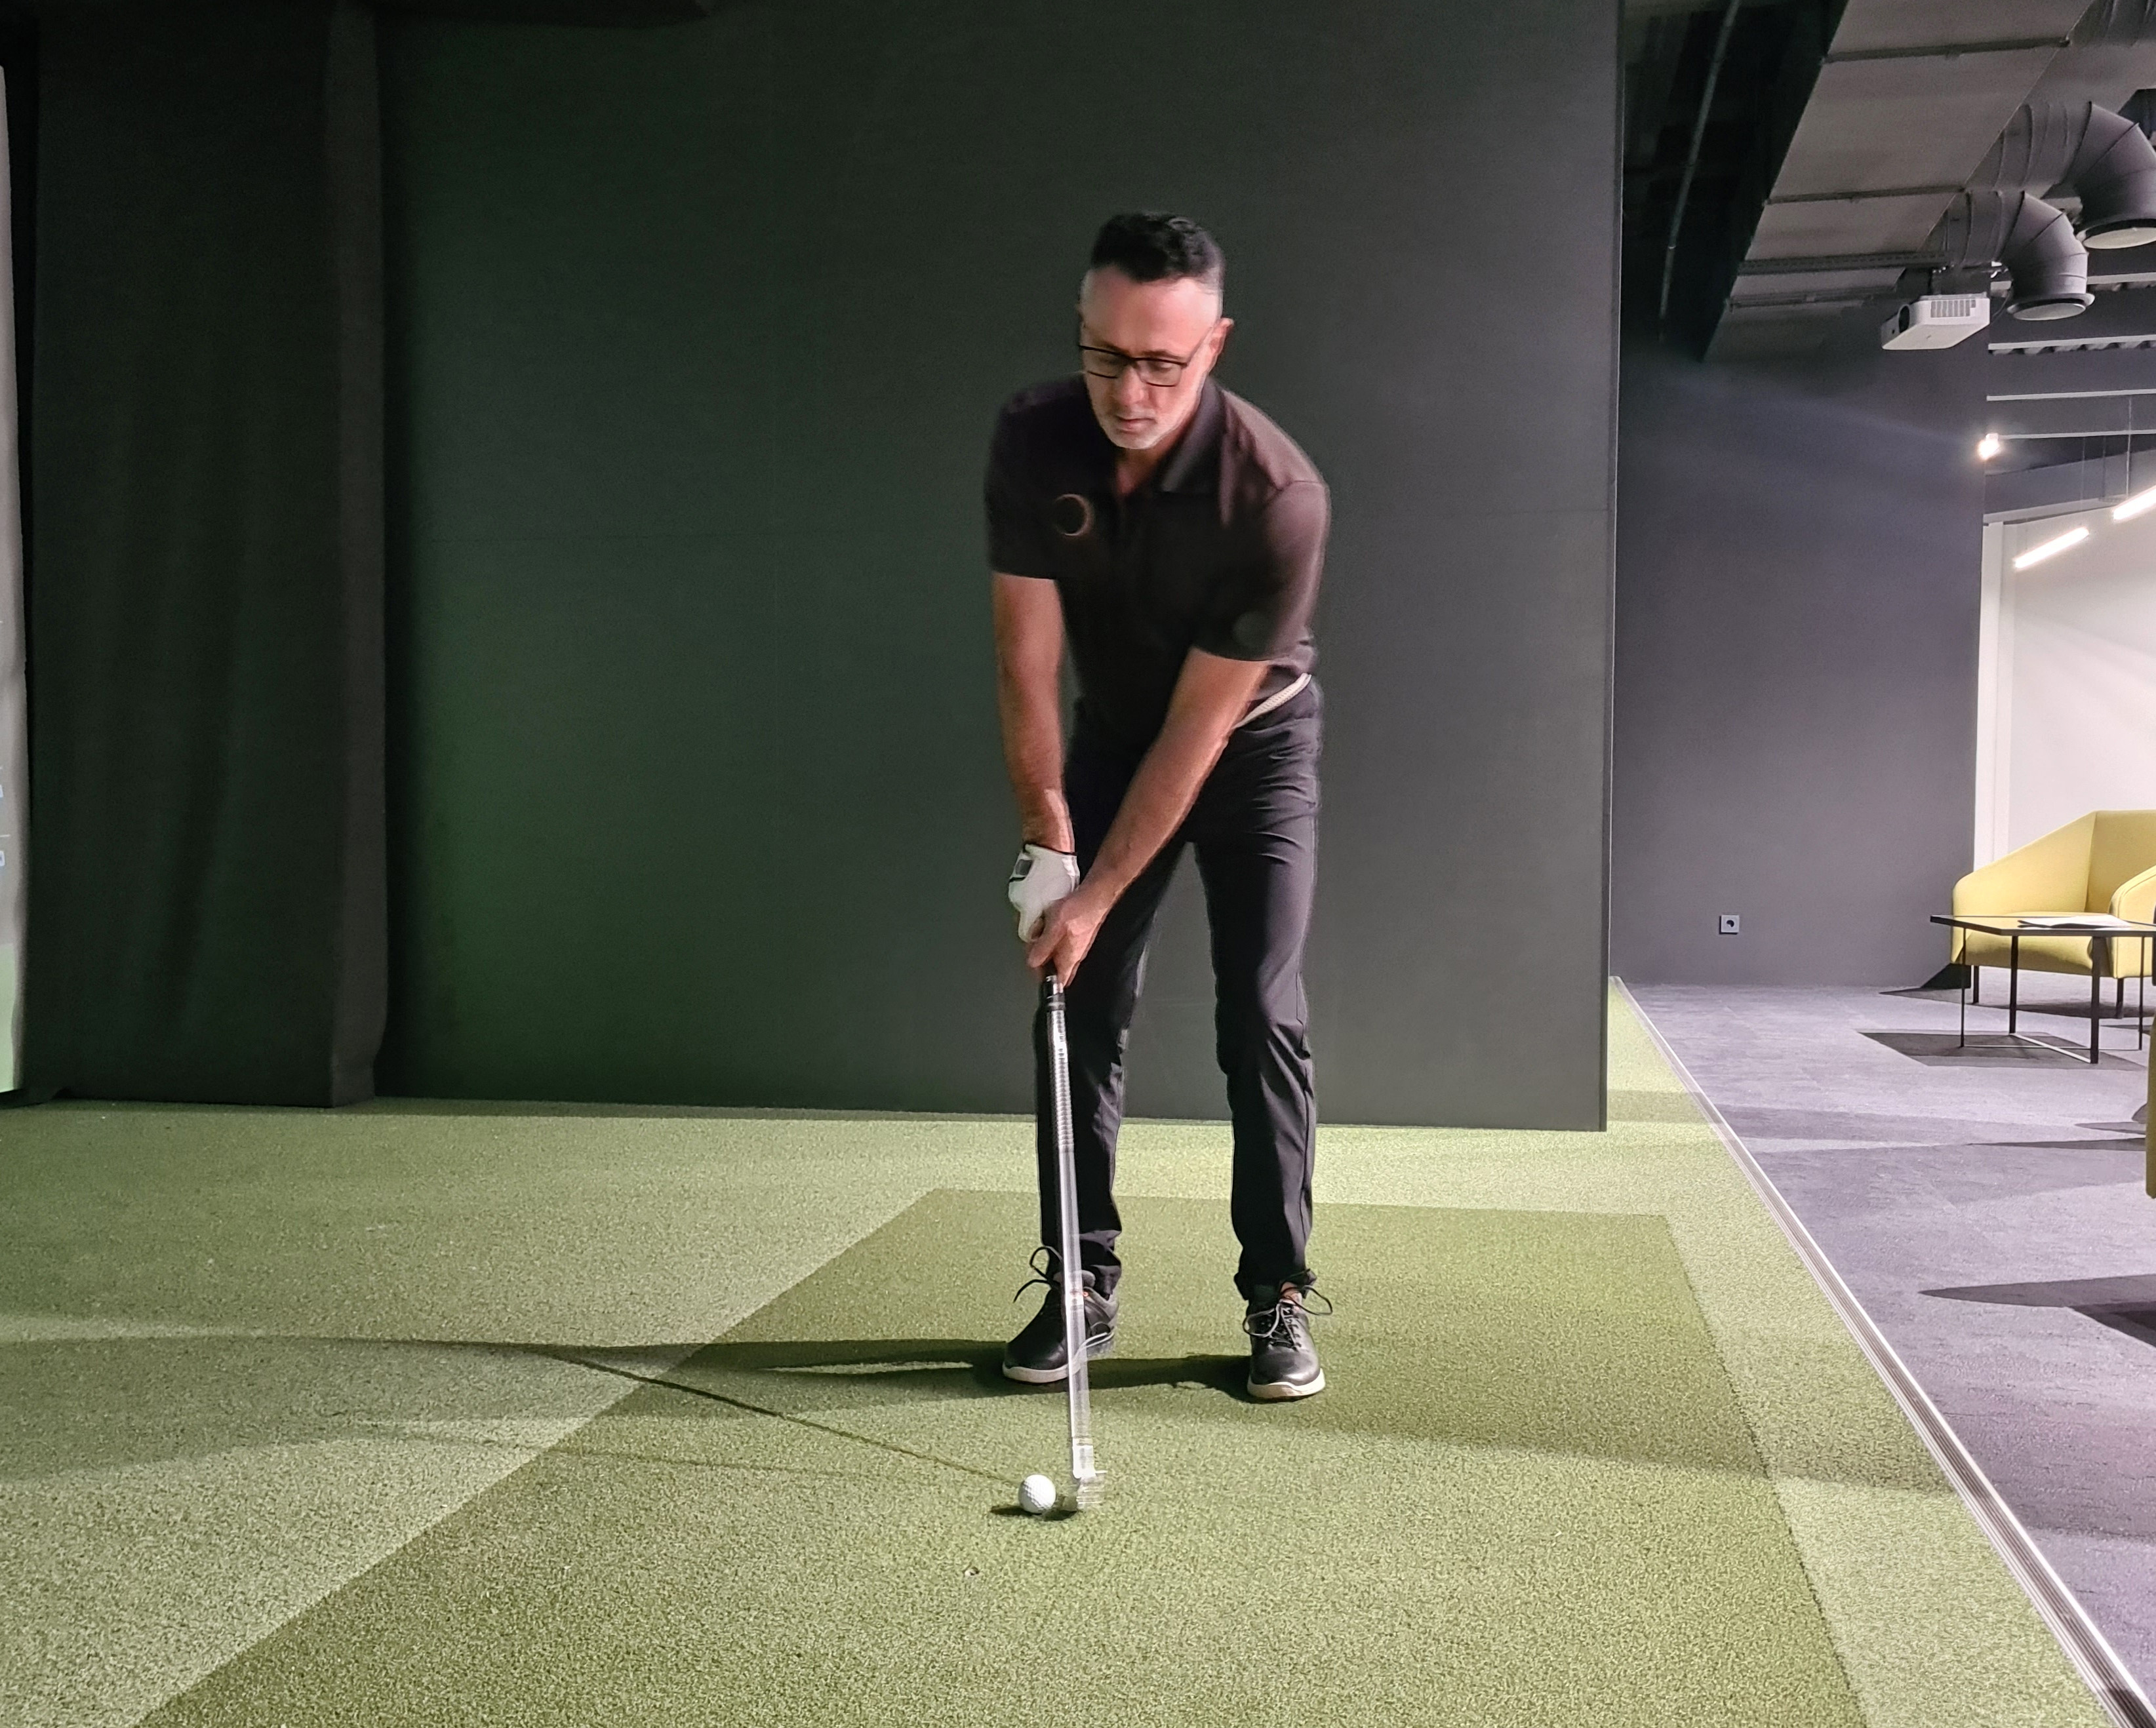 Golf indoor area for practice. A man is hitting the ball in virtual simulator.